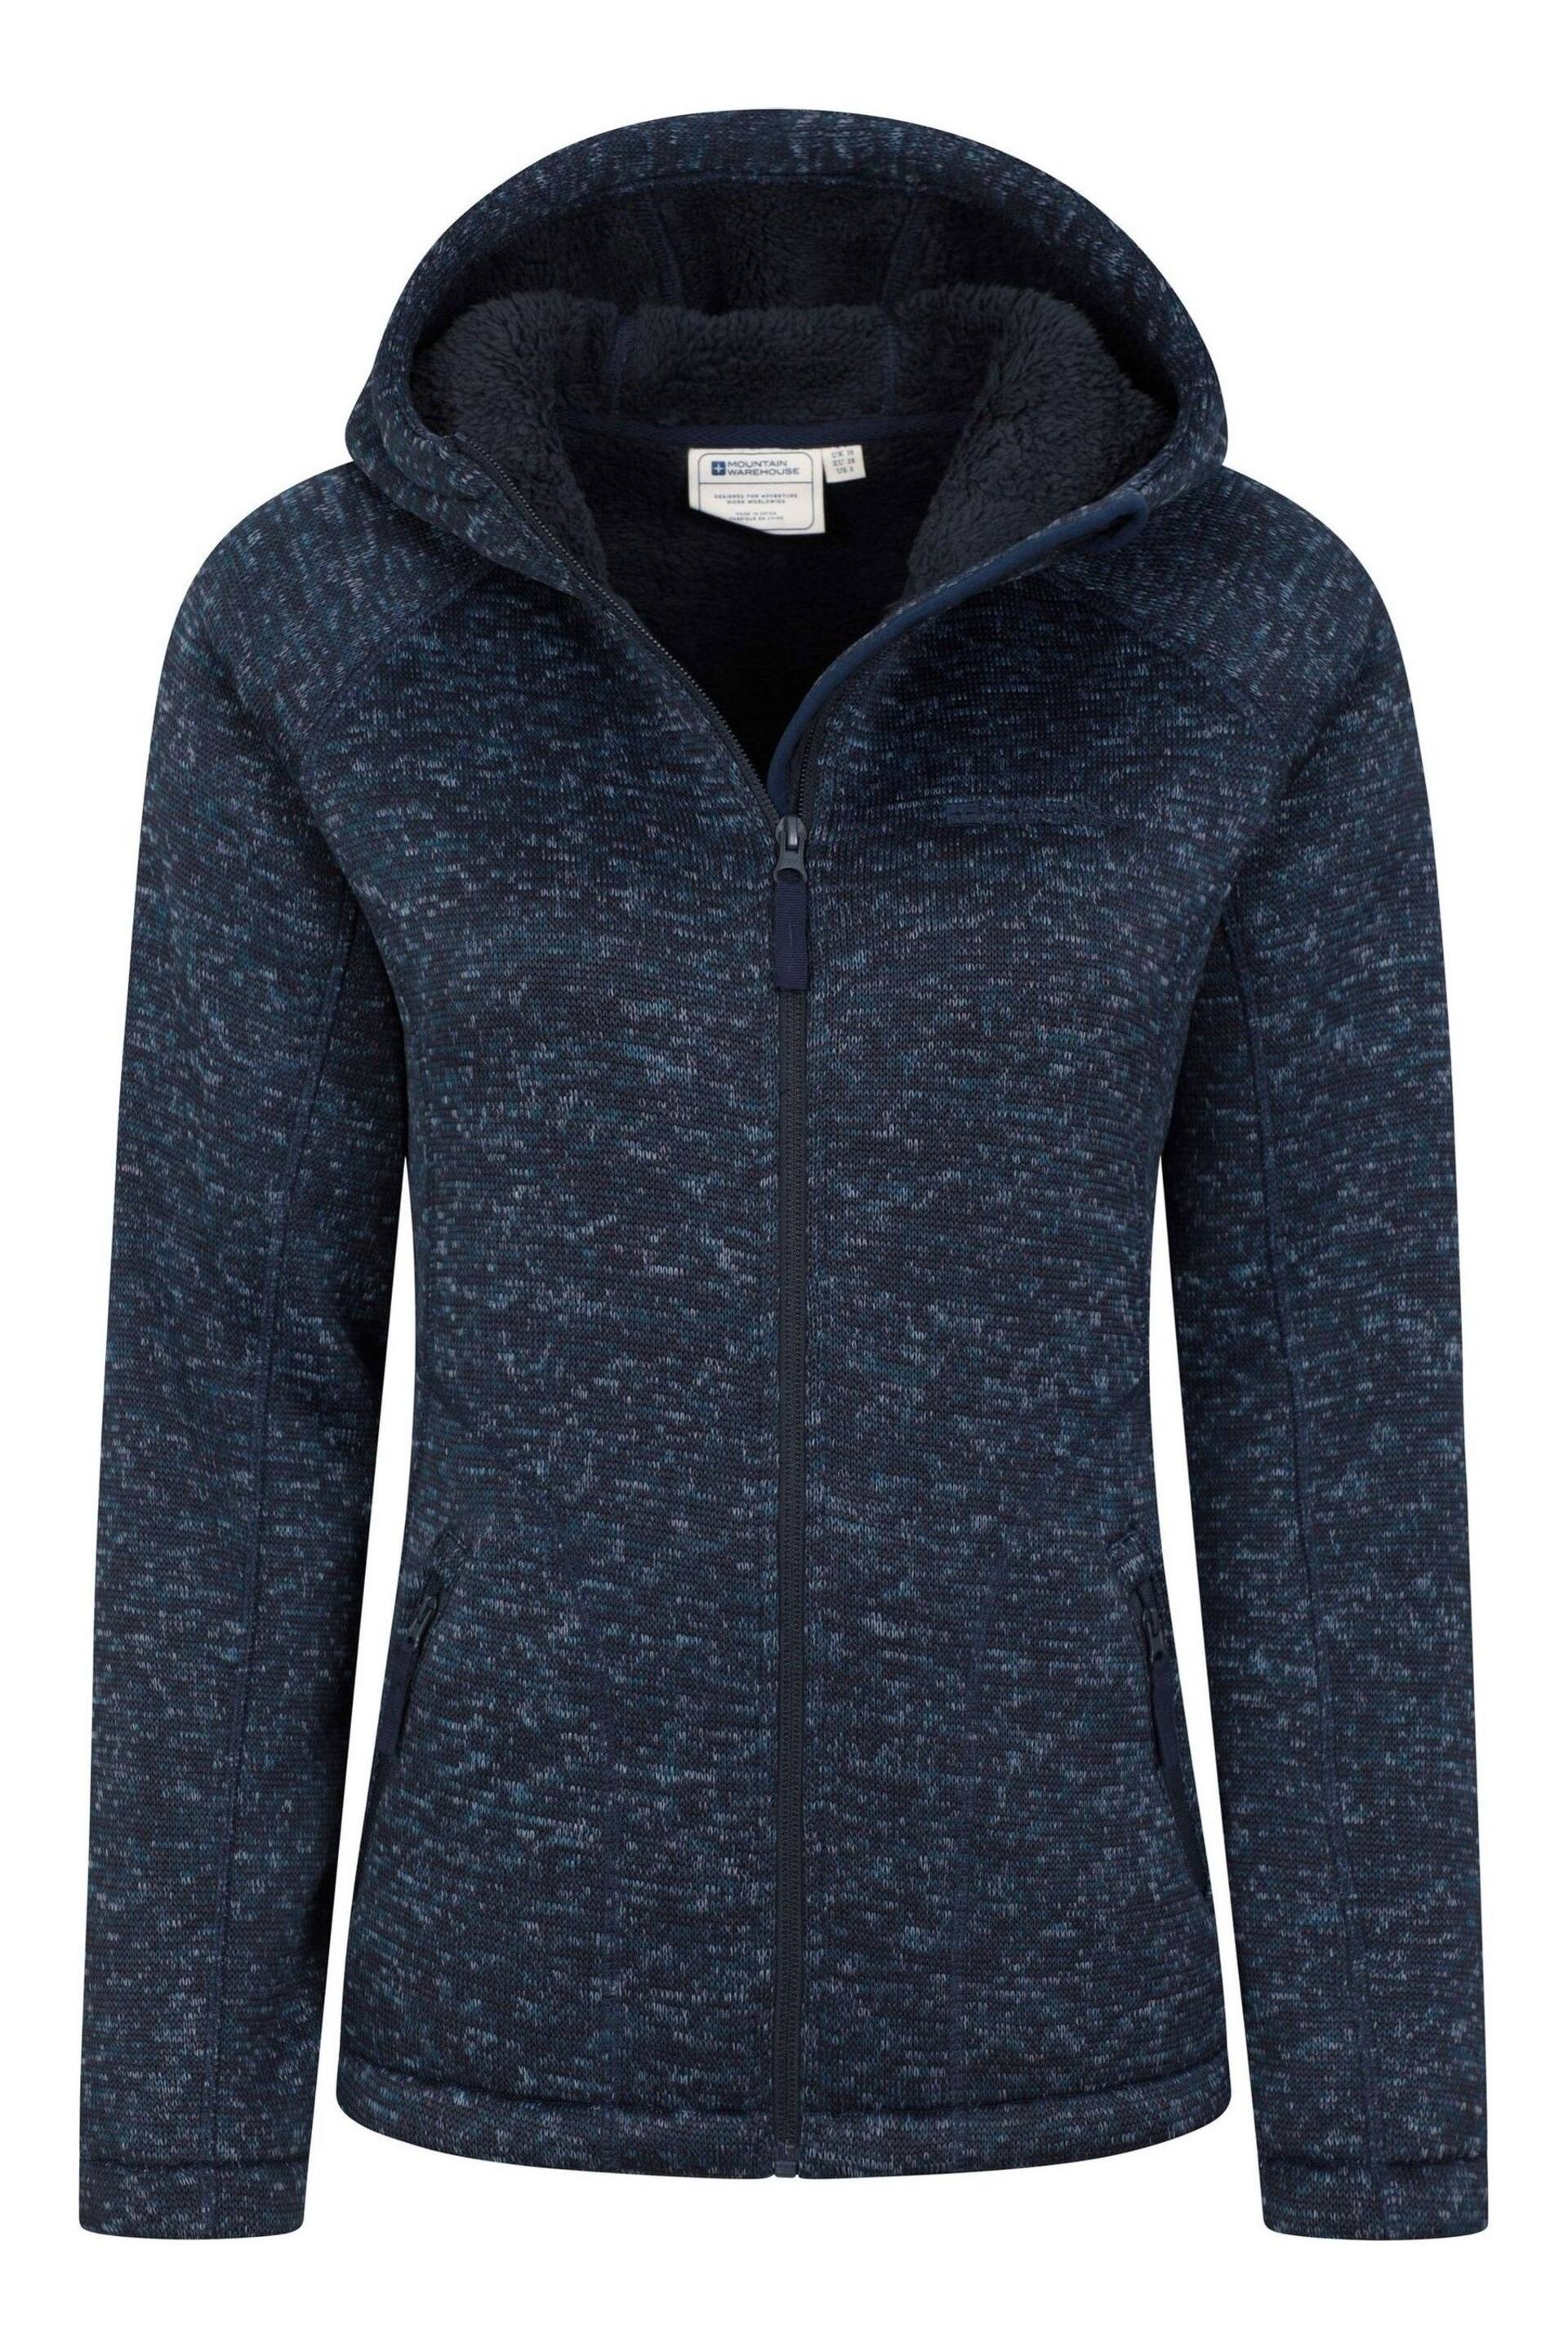 Mountain Warehouse Navy Blue Nevis Sherpa Lined Hoodie - Image 5 of 5